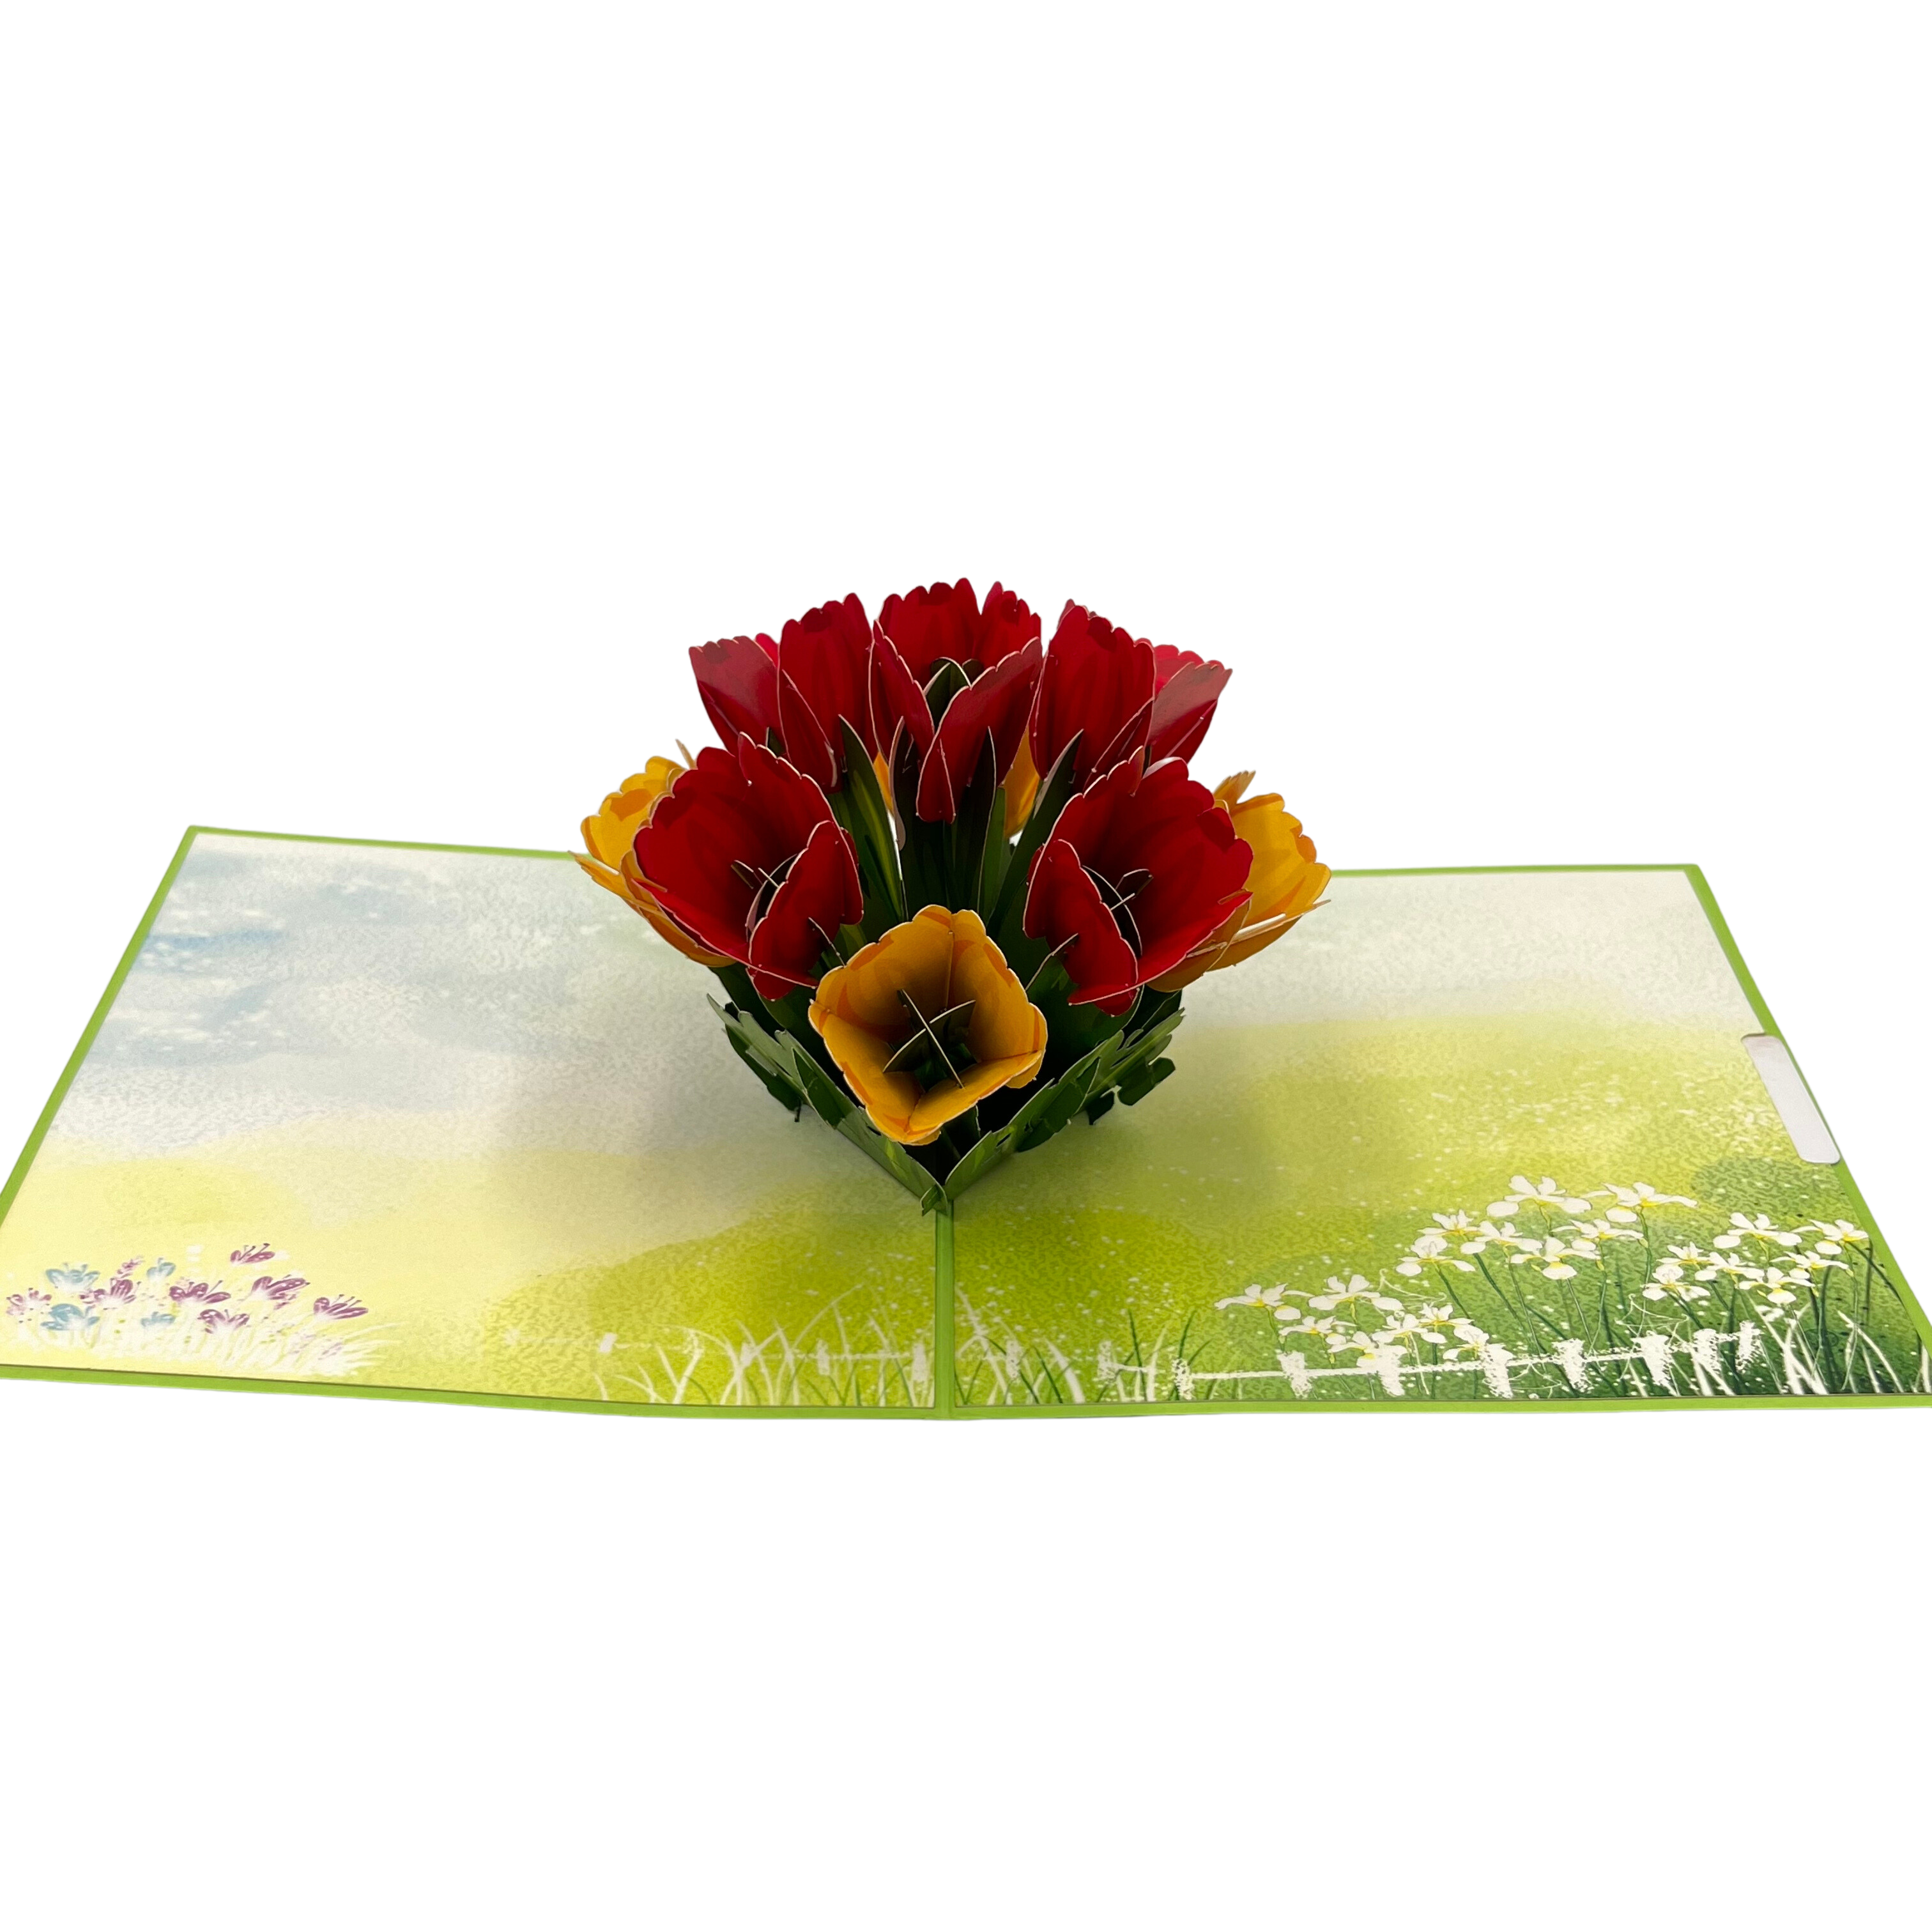 Pop Up Greeting Card Blooming Bouquets of Tulips Flower Spring Nature Card Birthday Card Thank You Card For Kids Mom Dad Family Friend